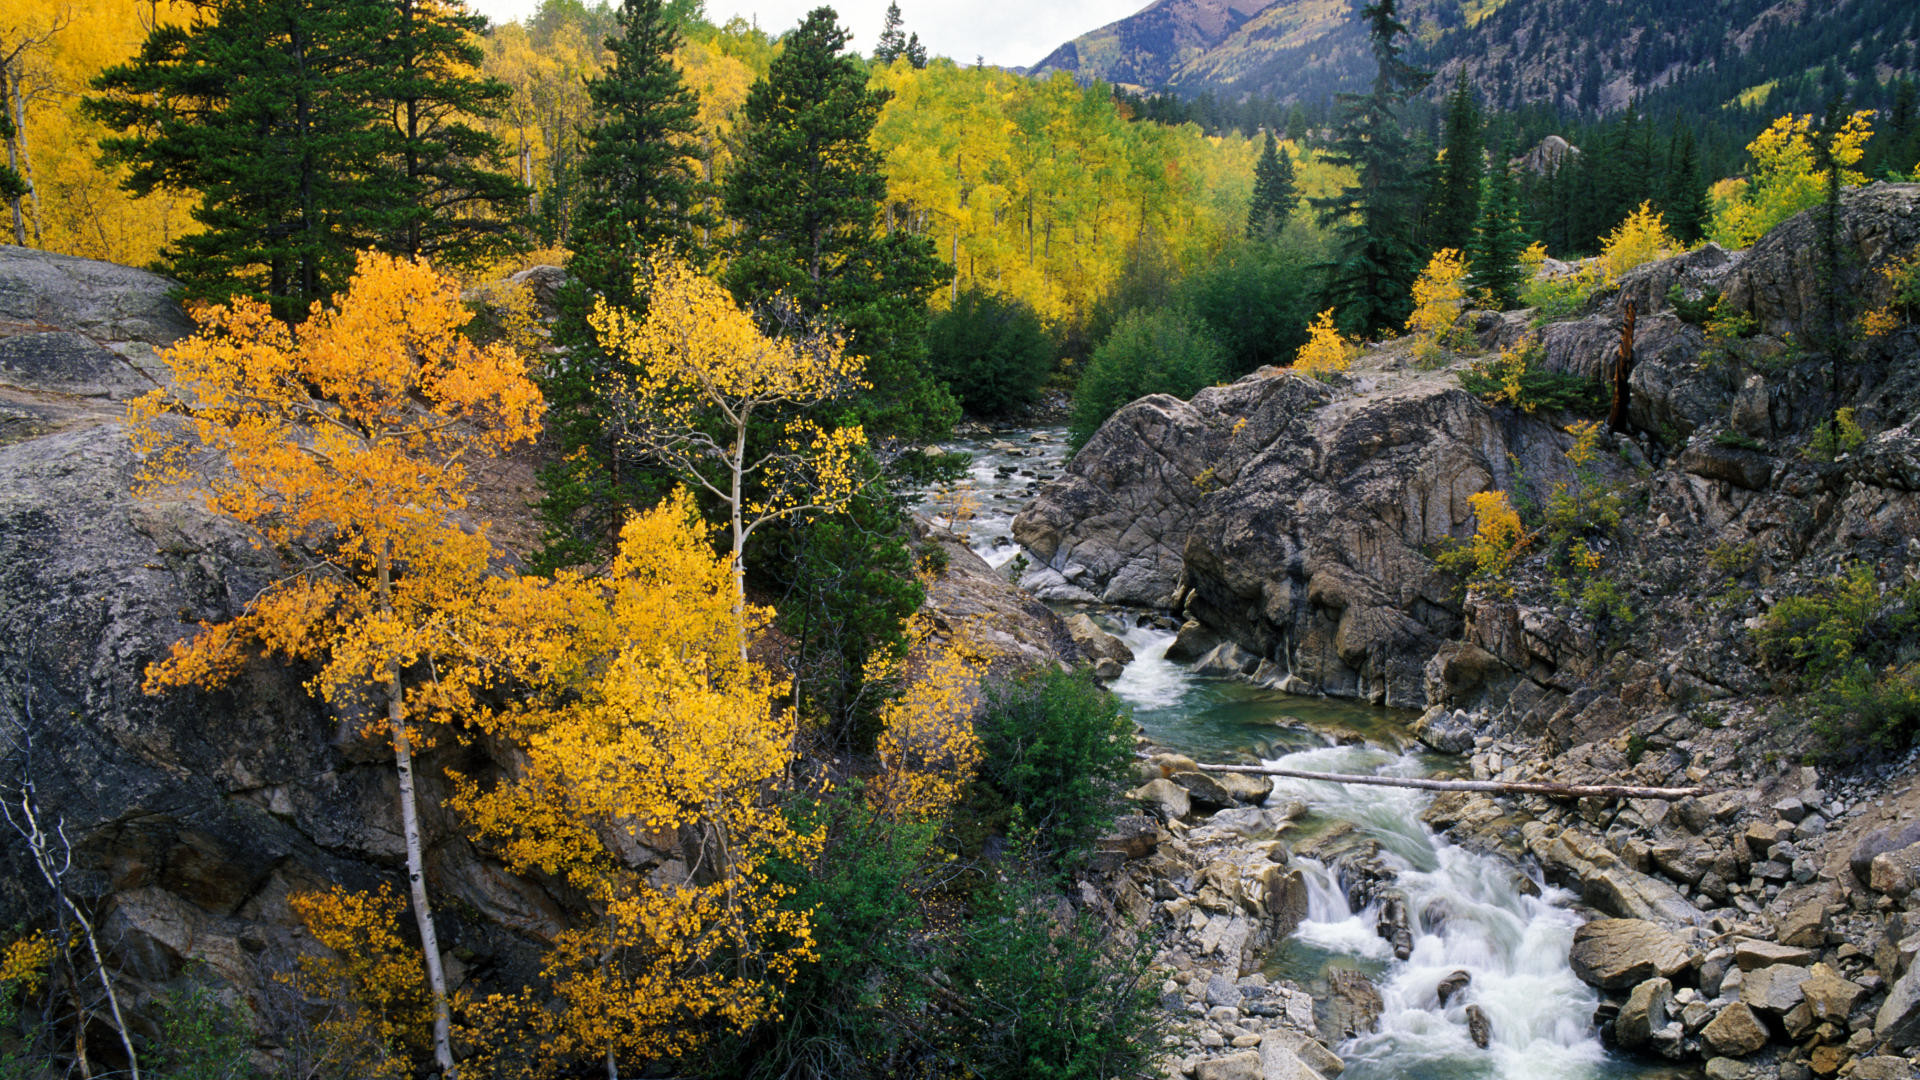 1920x1080 Download Background - Roaring Fork River, White River National Forest,  Colorado - Free Cool Backgrounds and Wallpapers for your Desktop Or Laptop.